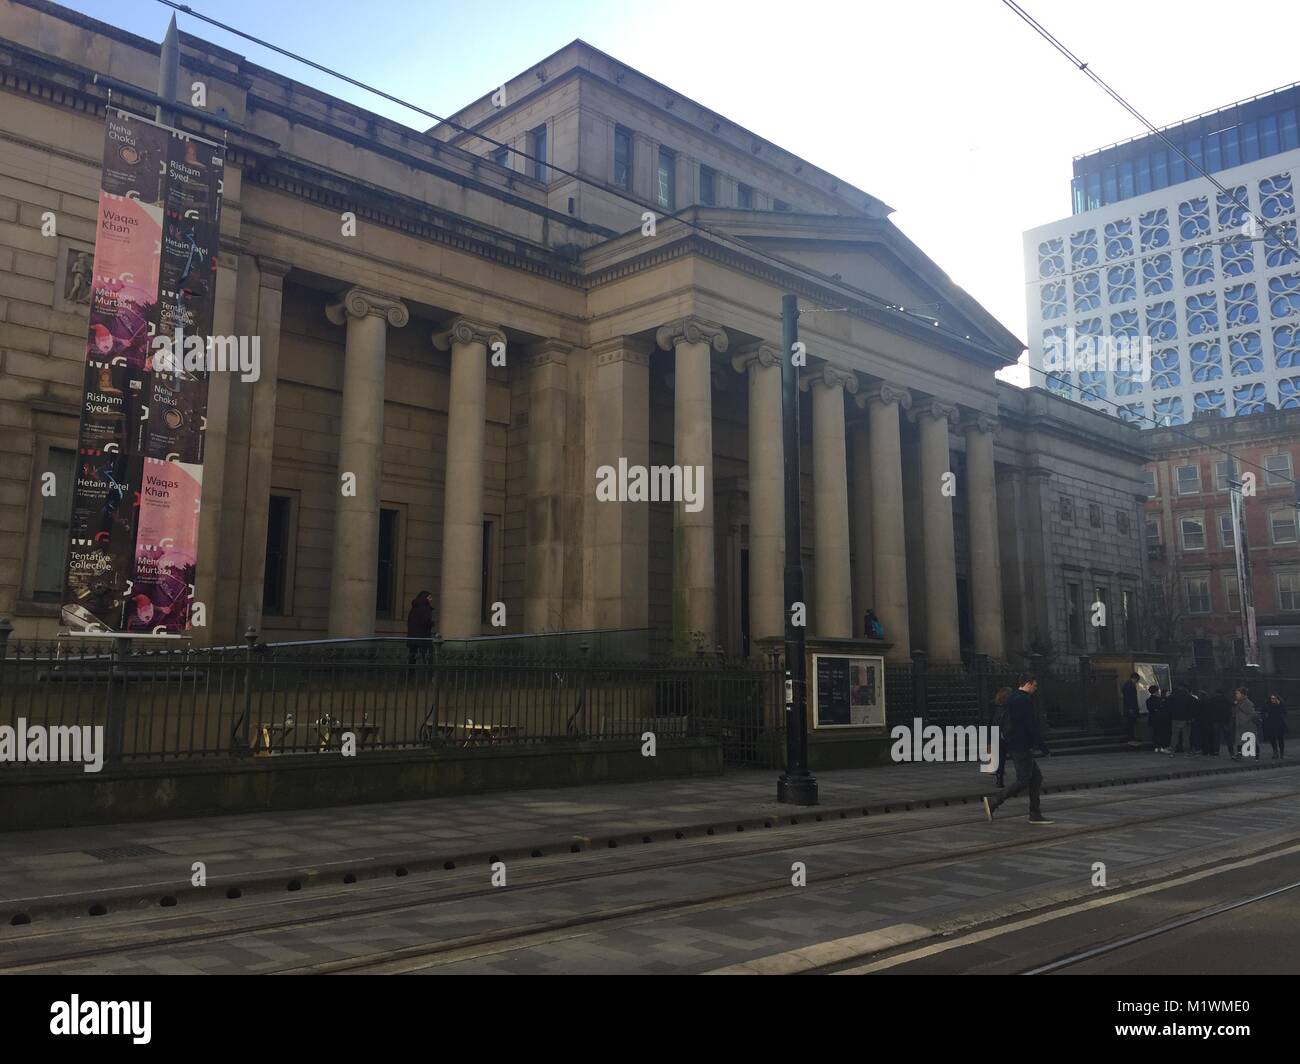 Manchester, England, 02 Febuary 2018. Exterior view of the Manchester Art Gallery in Manchester, England, 02 Febuary 2018. The art gallery removed the painting 'Hylas and the Nymphs' (1896) by John William Waterhouse from its exhibition due to its depiction of women - triggering a storm of indignation. Photo: Britta Schultejans/dpa Credit: dpa picture alliance/Alamy Live News Stock Photo